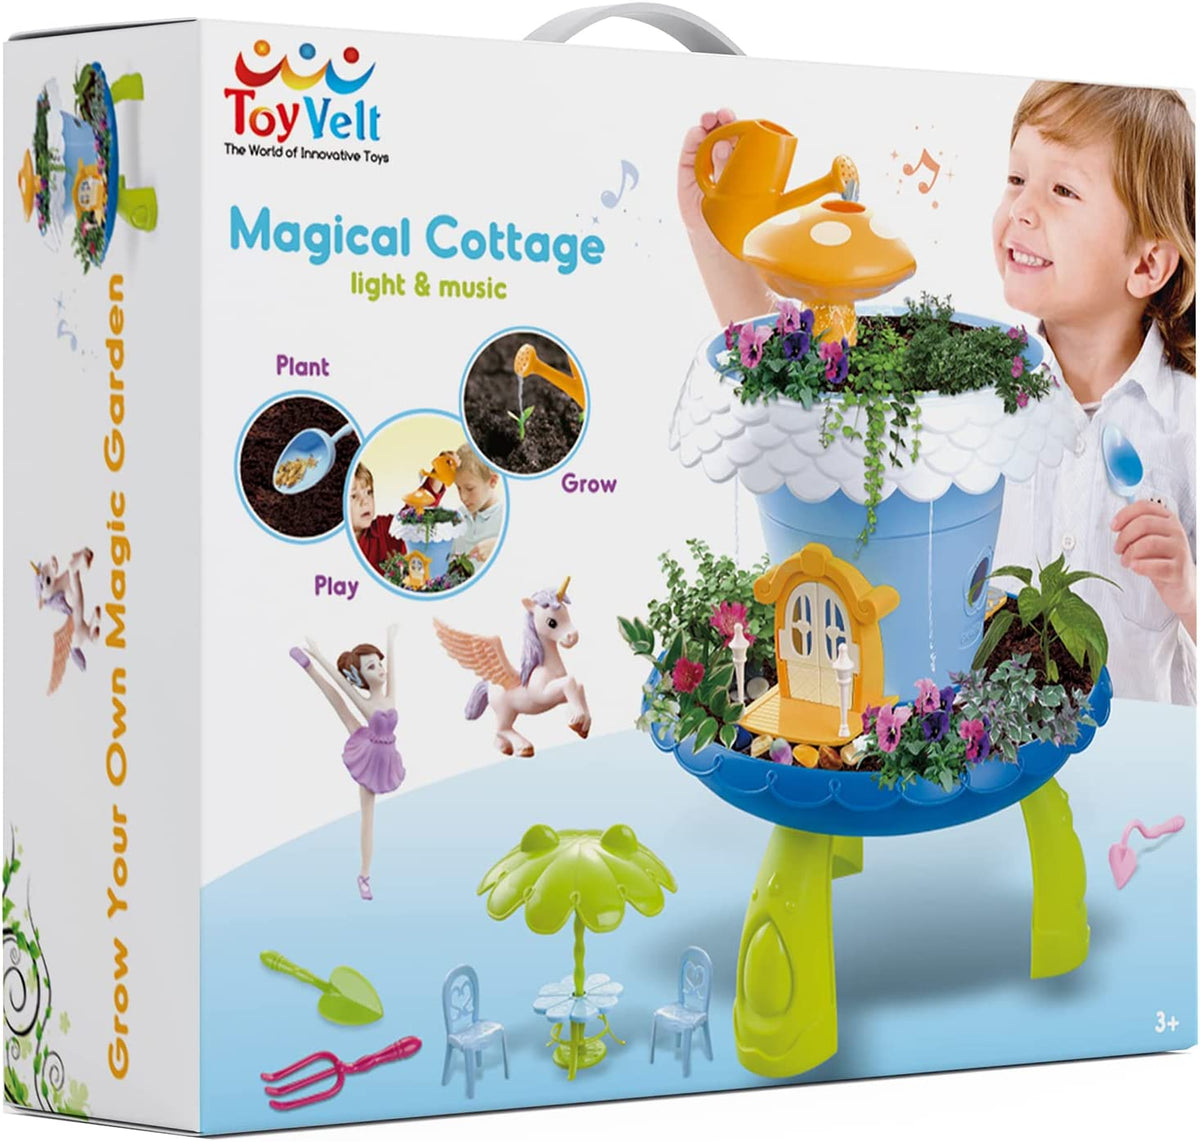 Buy Art Projects Kids Garden - Growing Kit for 5 Year Old Girls - Crafts  for Kids Ages 8-12 - Birthday Gift For 6 Year Old Girl or Boy - Gardening  Kit